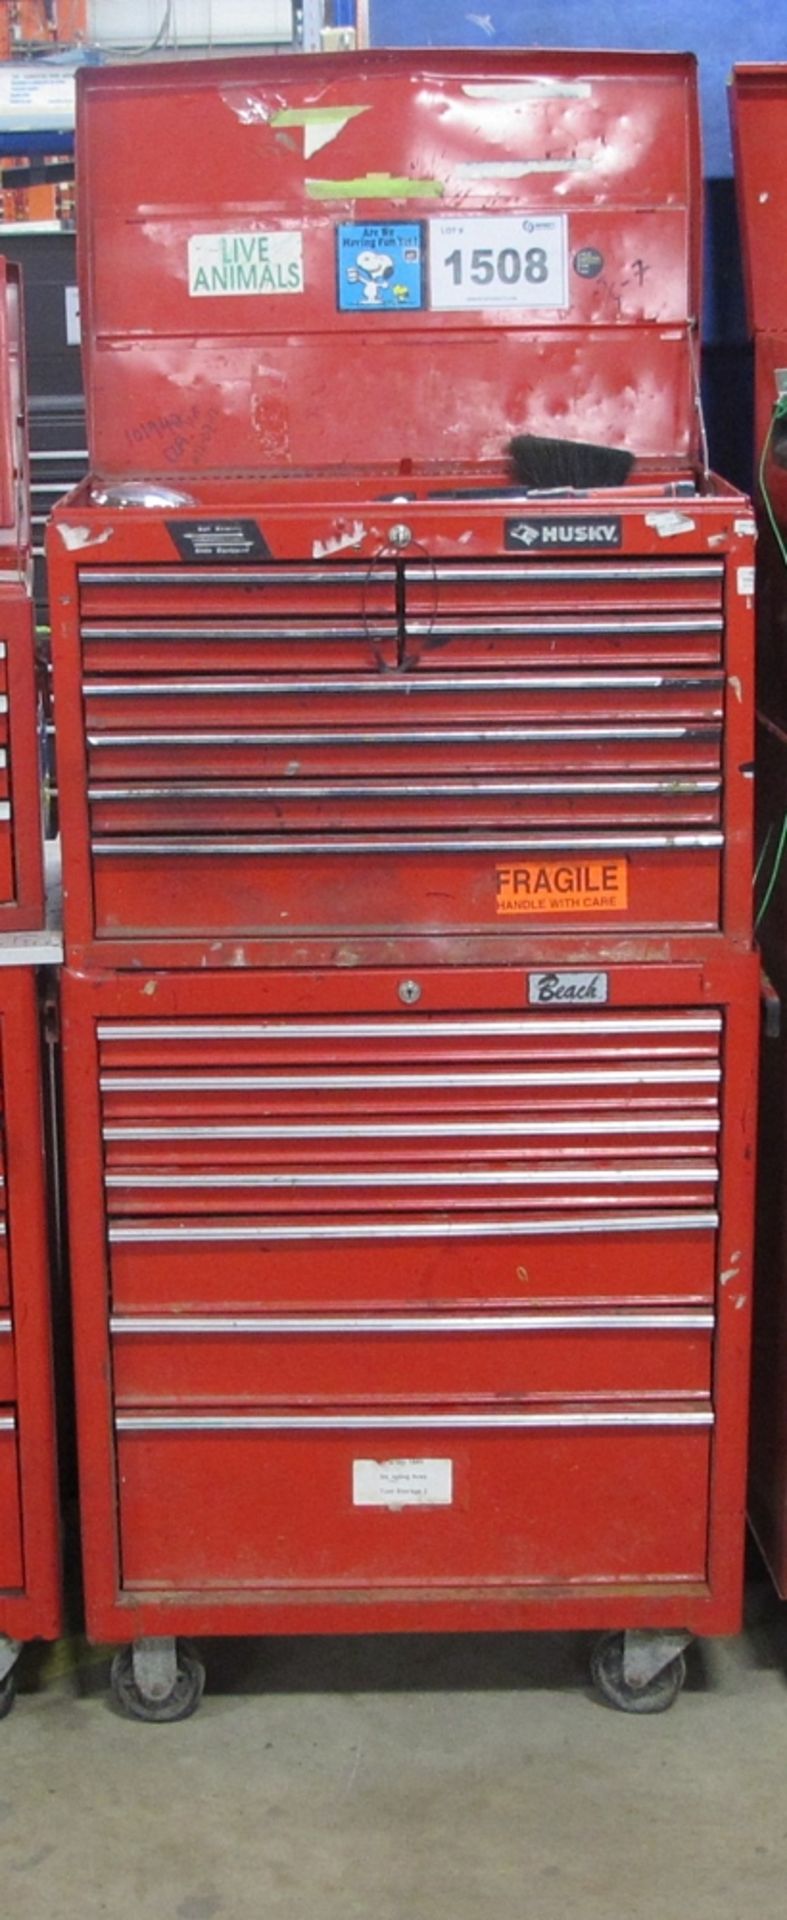 LOT OF 2 HUSKY/BEACH TOOL BOXES, 15 DRAWERS W/TOOLS (100 SHIRLEY AVE KITCHENER)